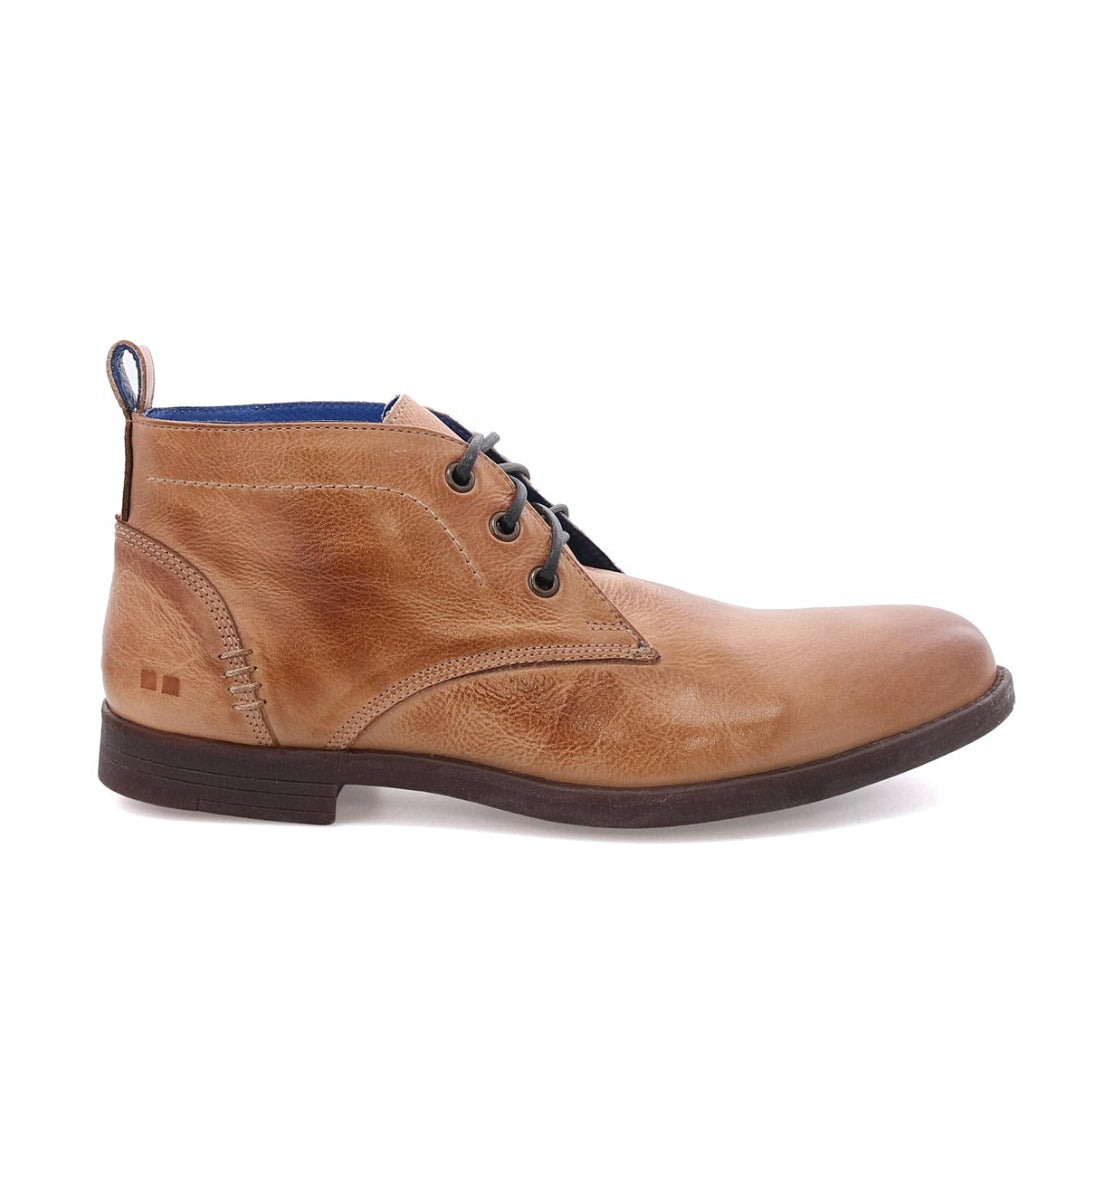 A single Illiad Teak Rustic Boot by Bed Stu, a vegetable-tanned leather ankle boot with laces, isolated on a white background.